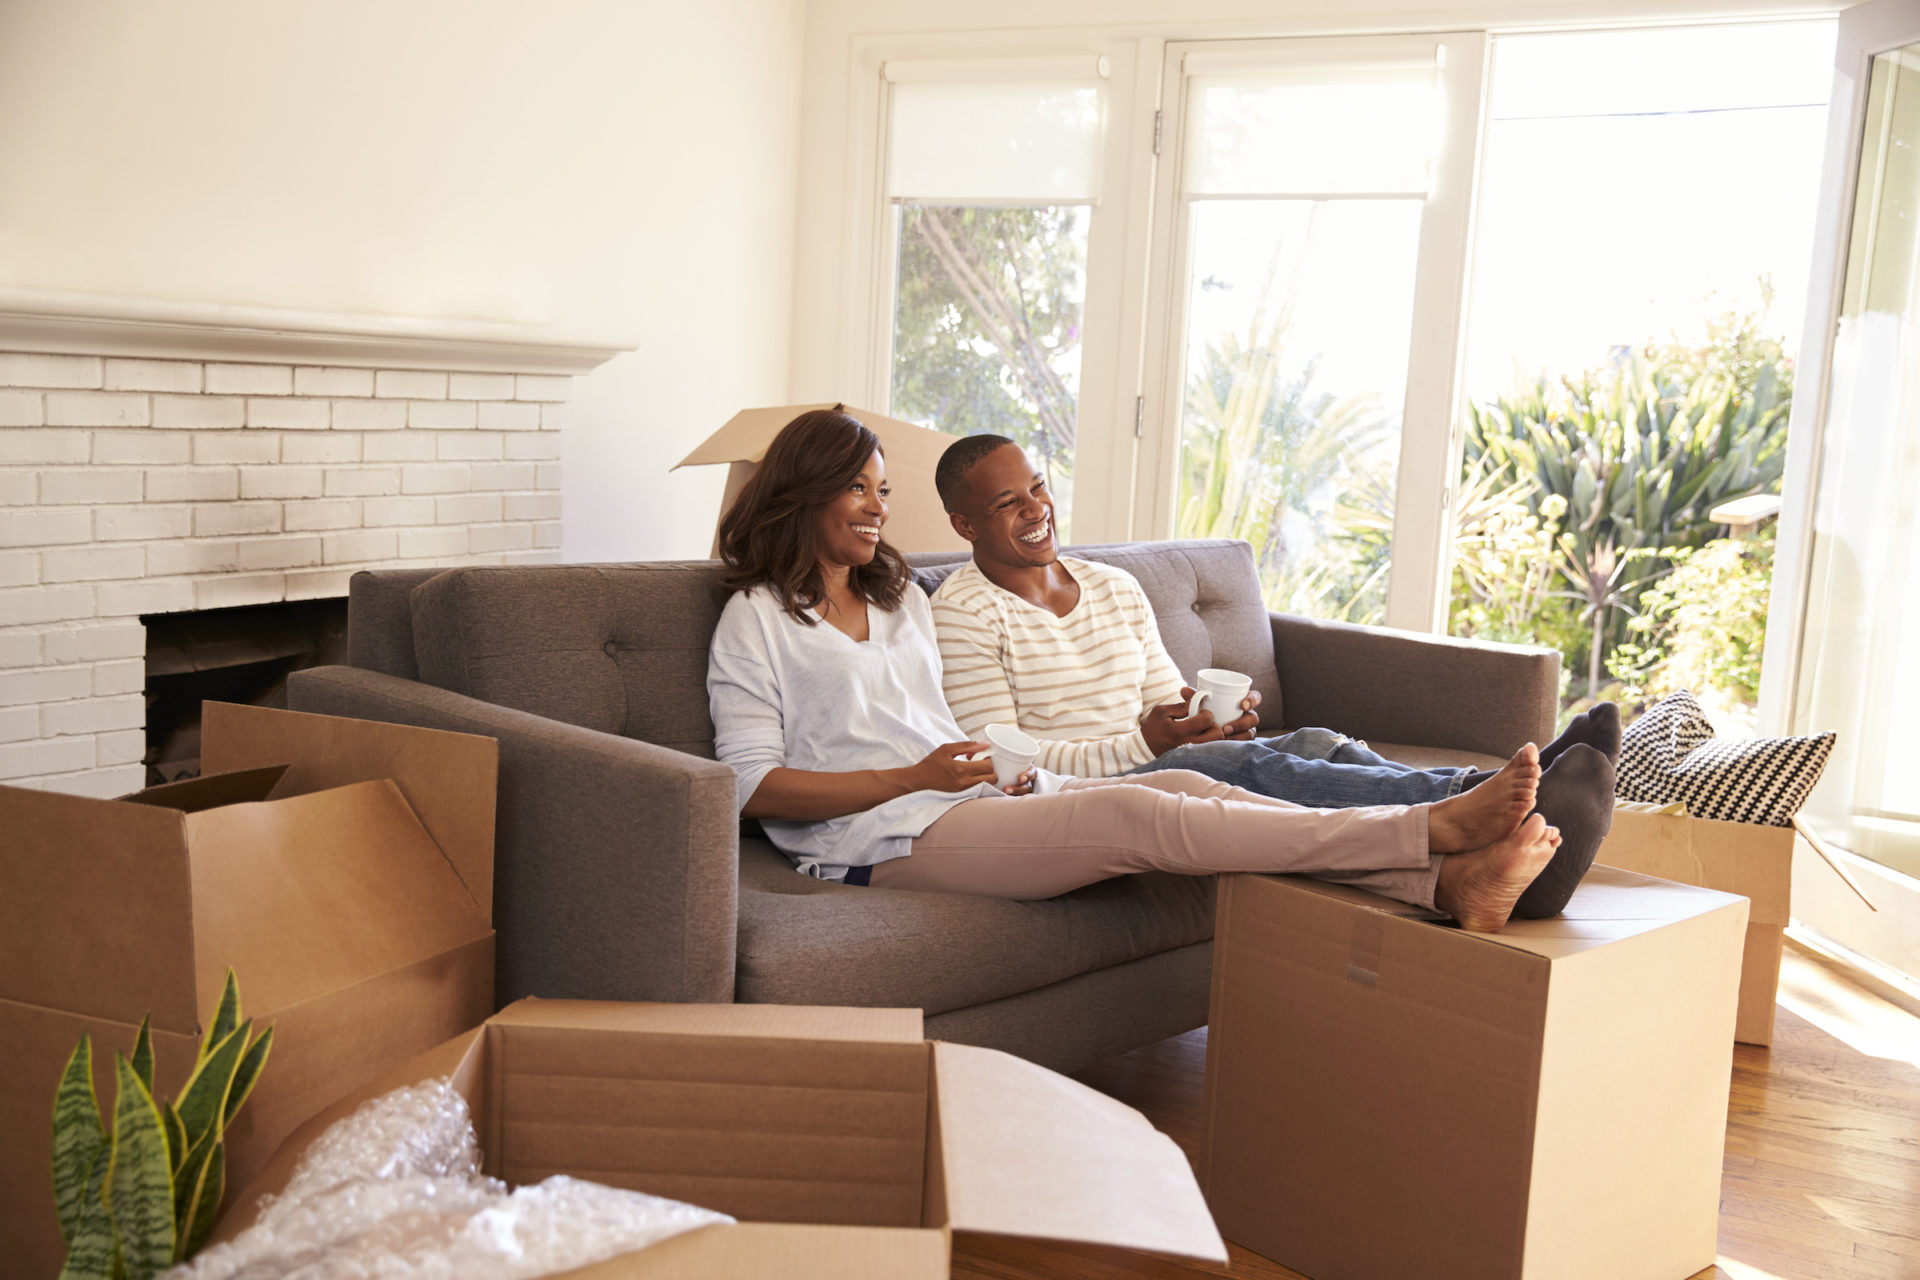 Tips For Making Move-In Day Great For Your New Resident